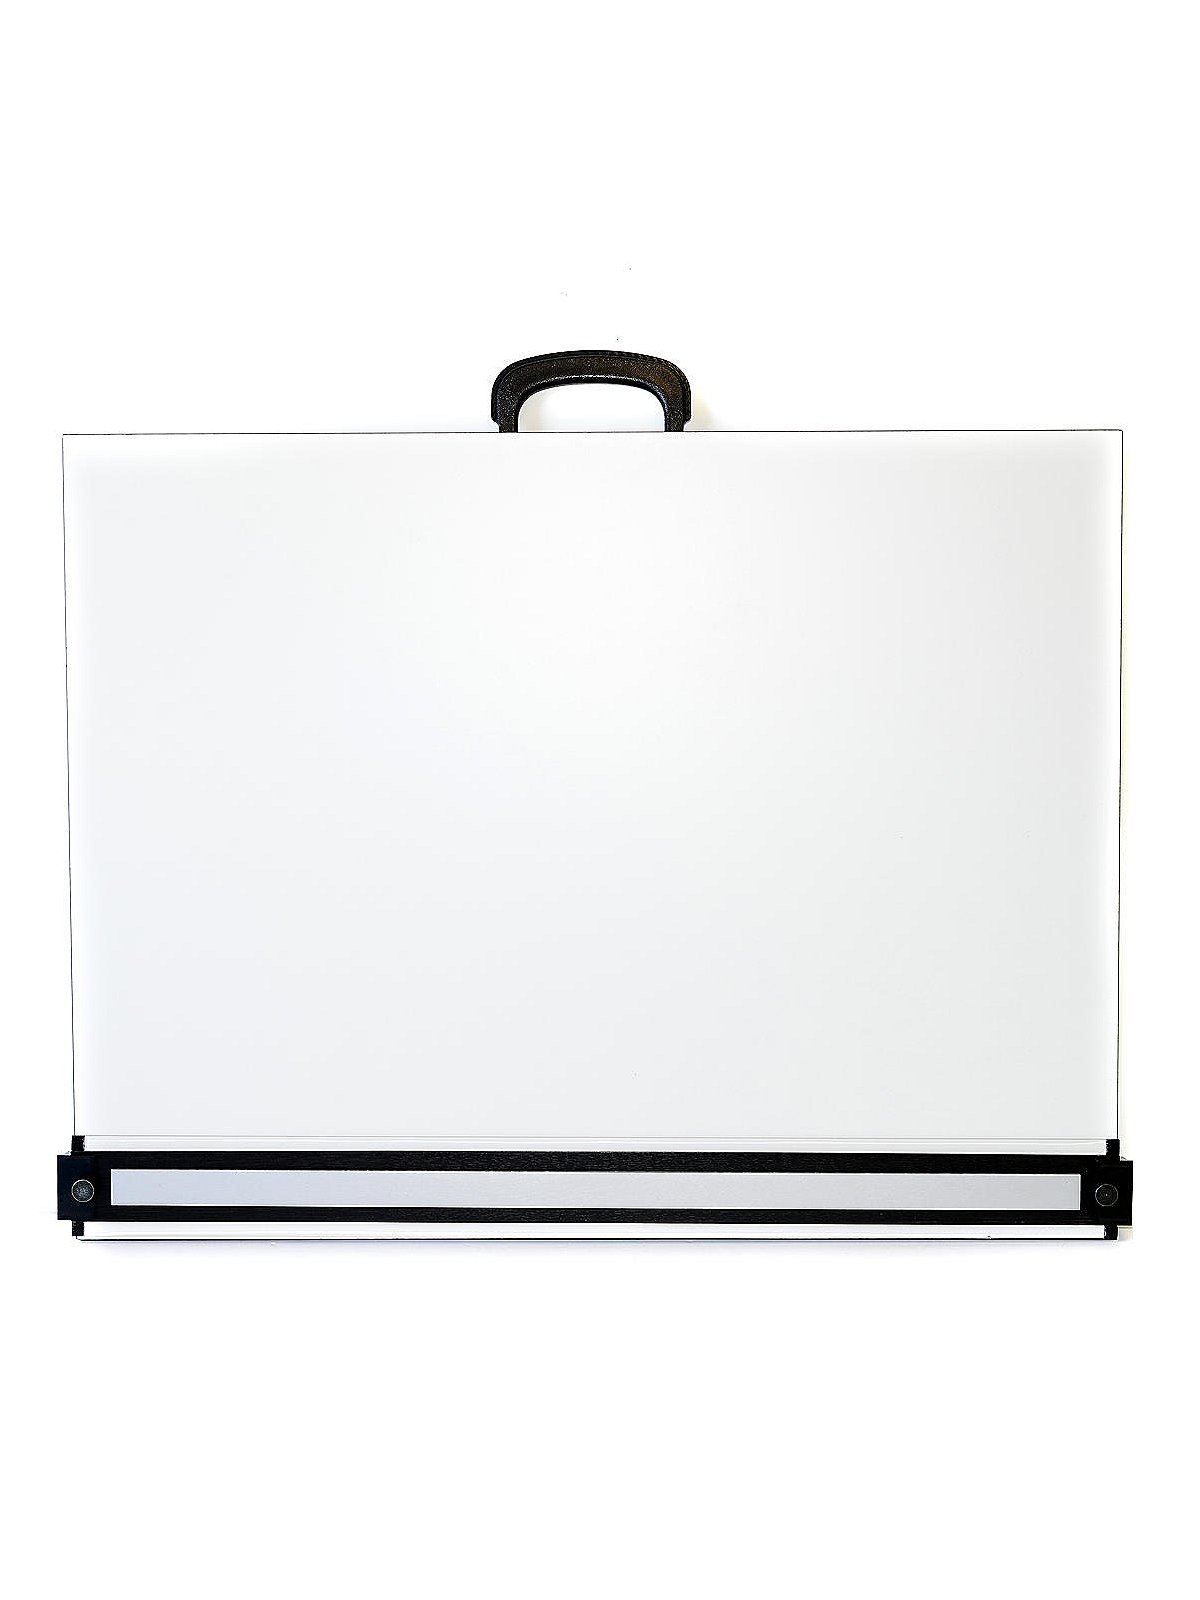 Pacific Arc, Table Top Drawing Board with Parallel Bar, White, 16 inch